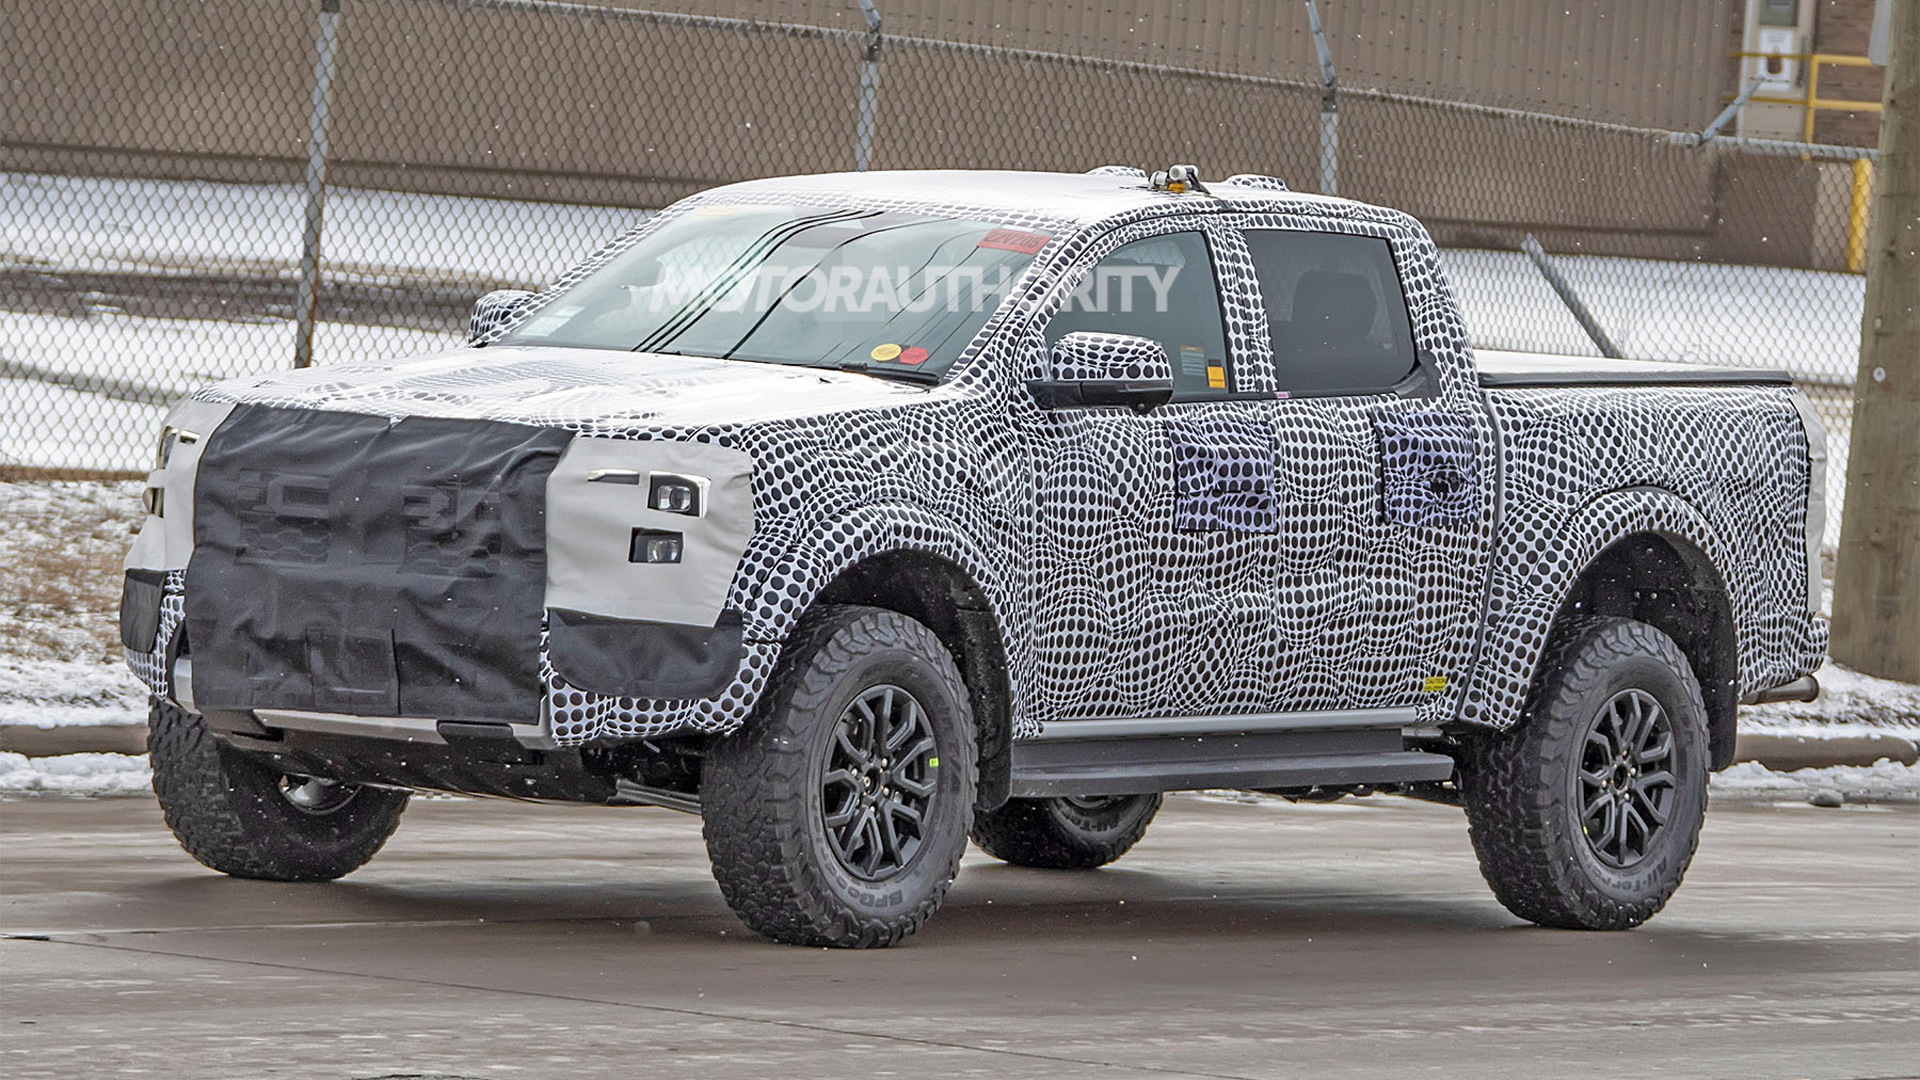 2022 Ford Ranger Raptor spy shots: Mid-size performance truck coming